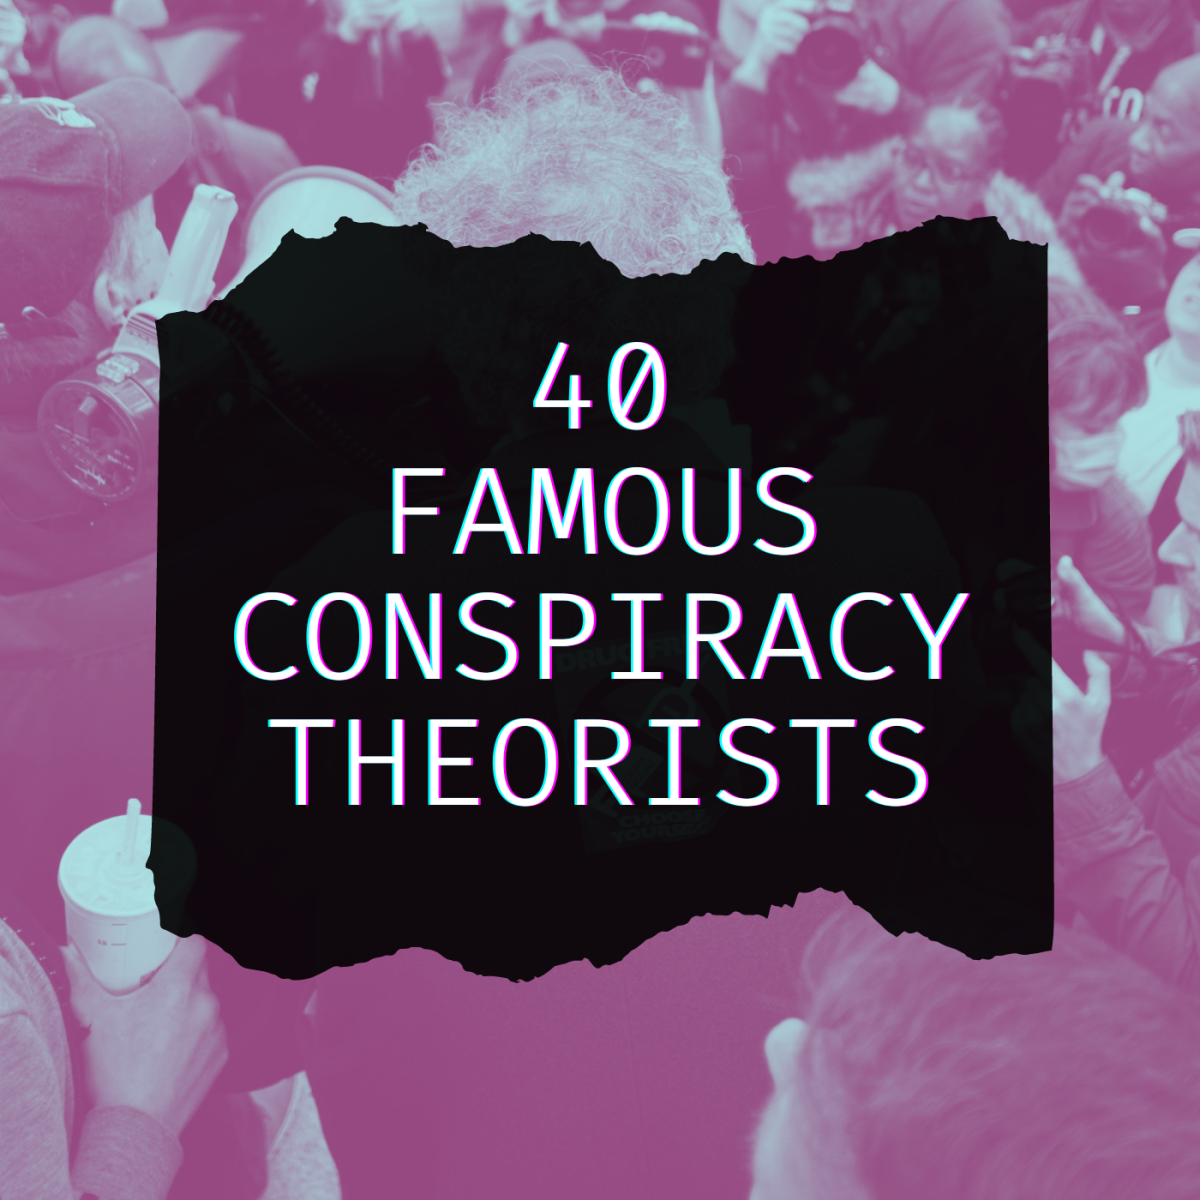 The Top 40 Conspiracy Theorists (A Complete List)